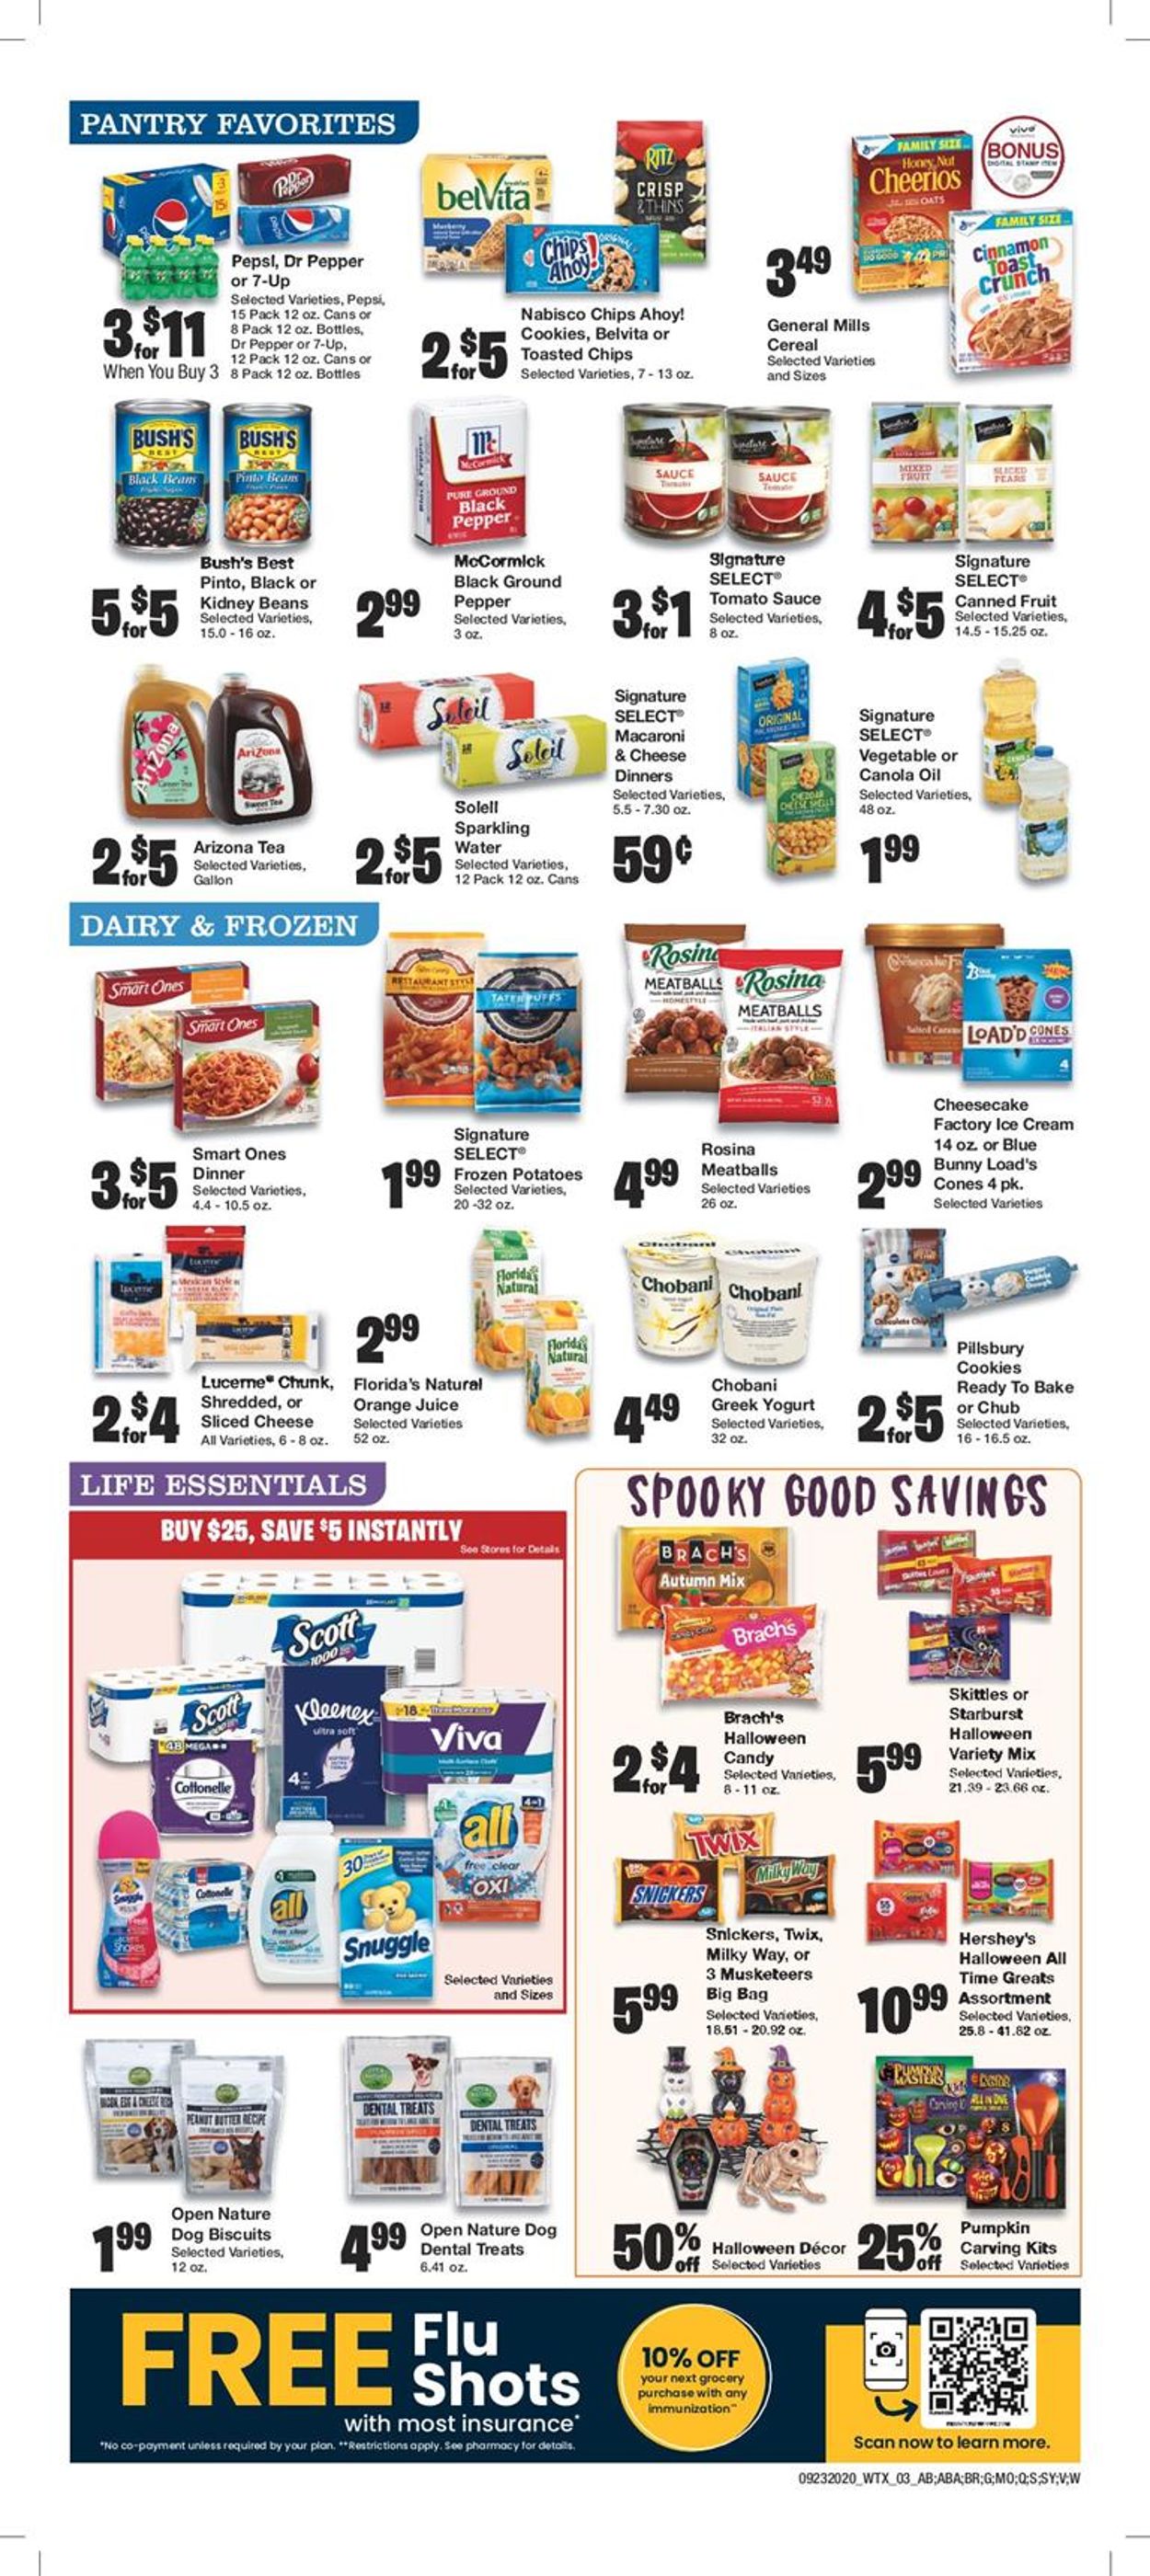 United Supermarkets Ad from 09/23/2020